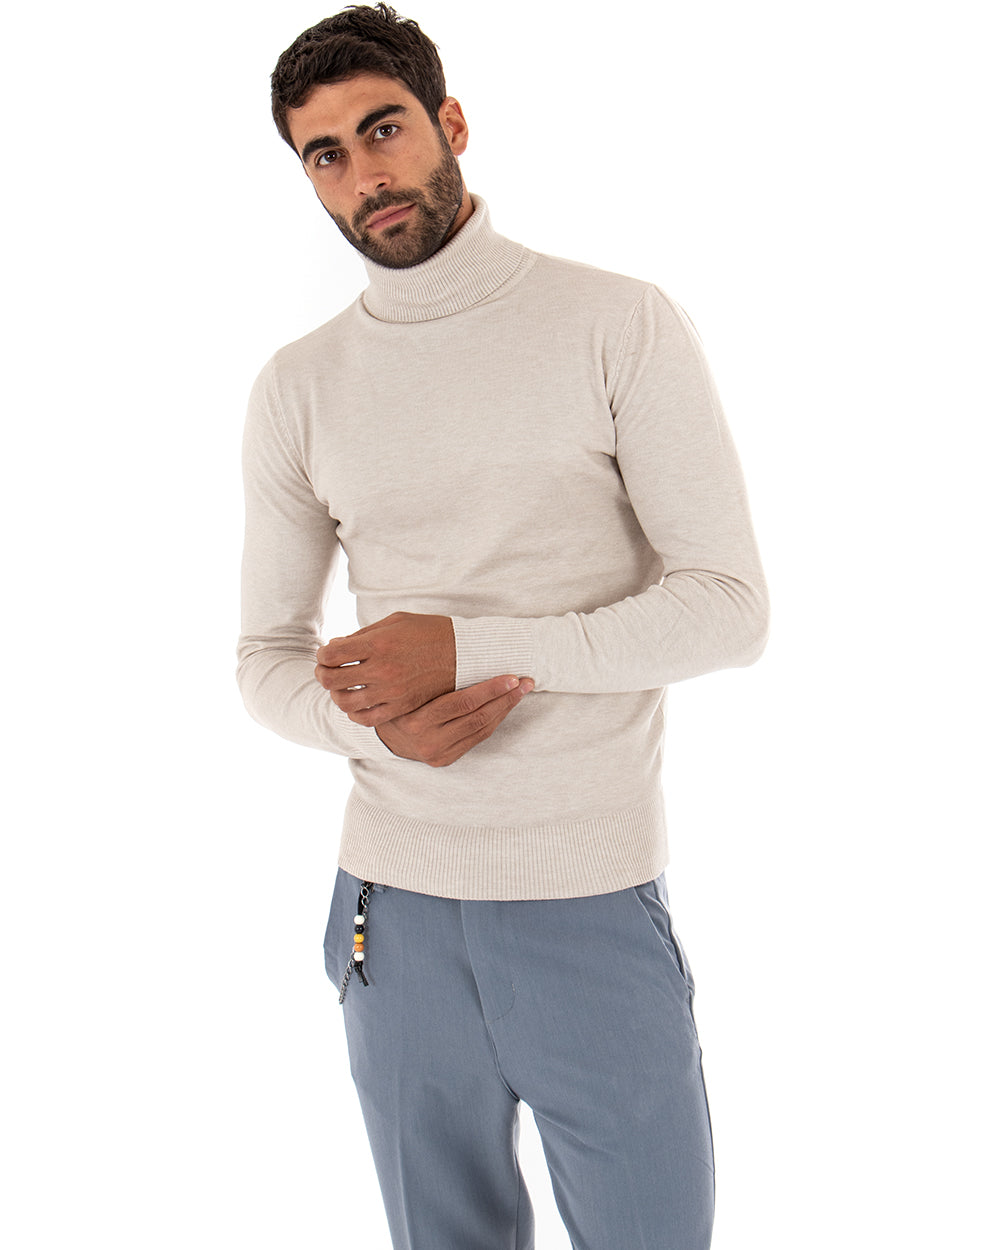 Men's Sweater Long Sleeves Elastic High Neck Solid Color Beige GIOSAL M2542A